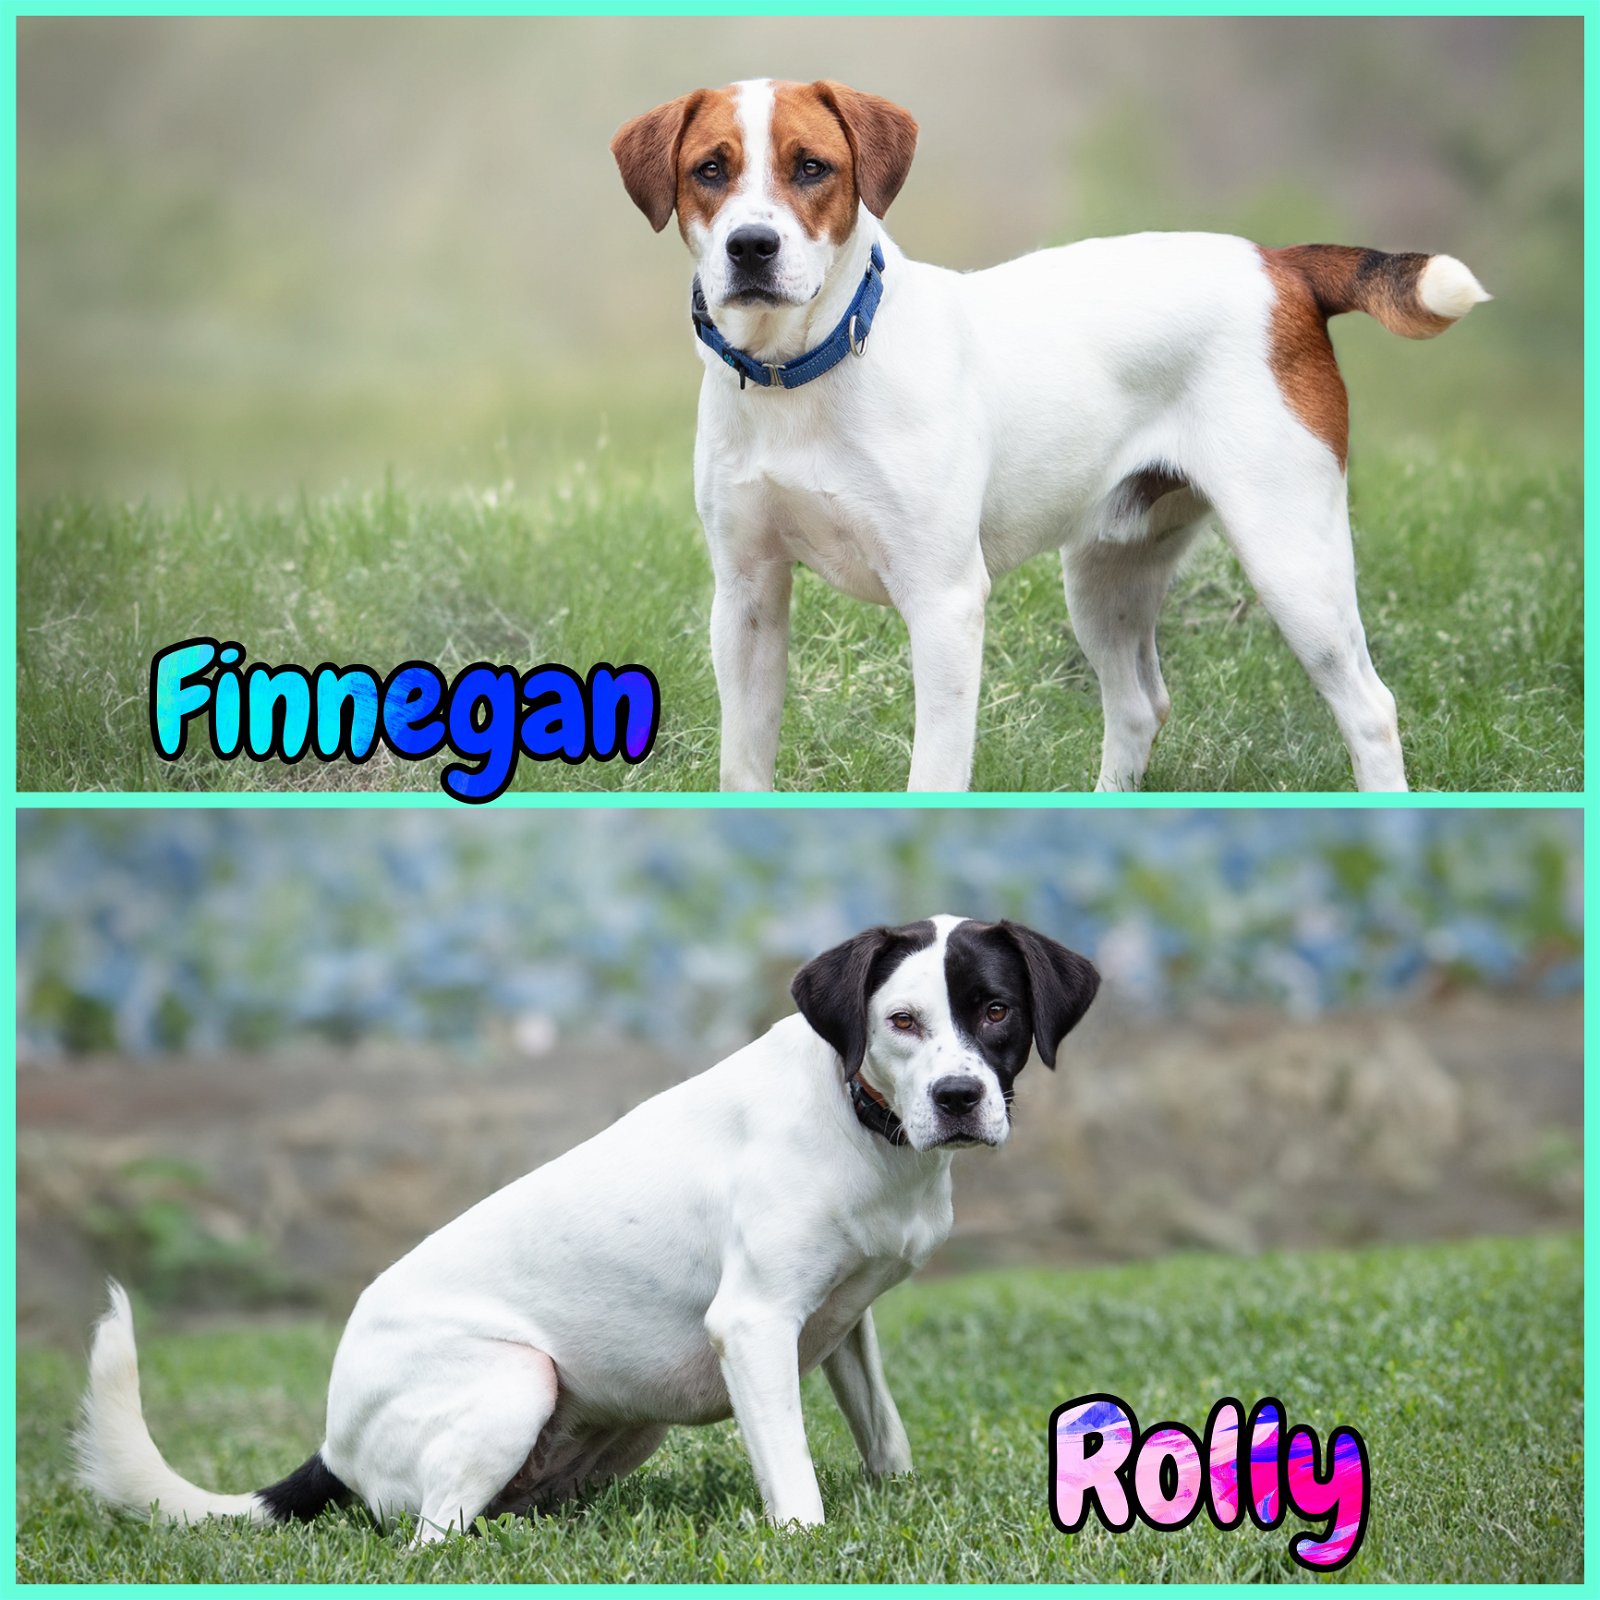 adoptable Dog in Boston, KY named Finnegan and Rolly